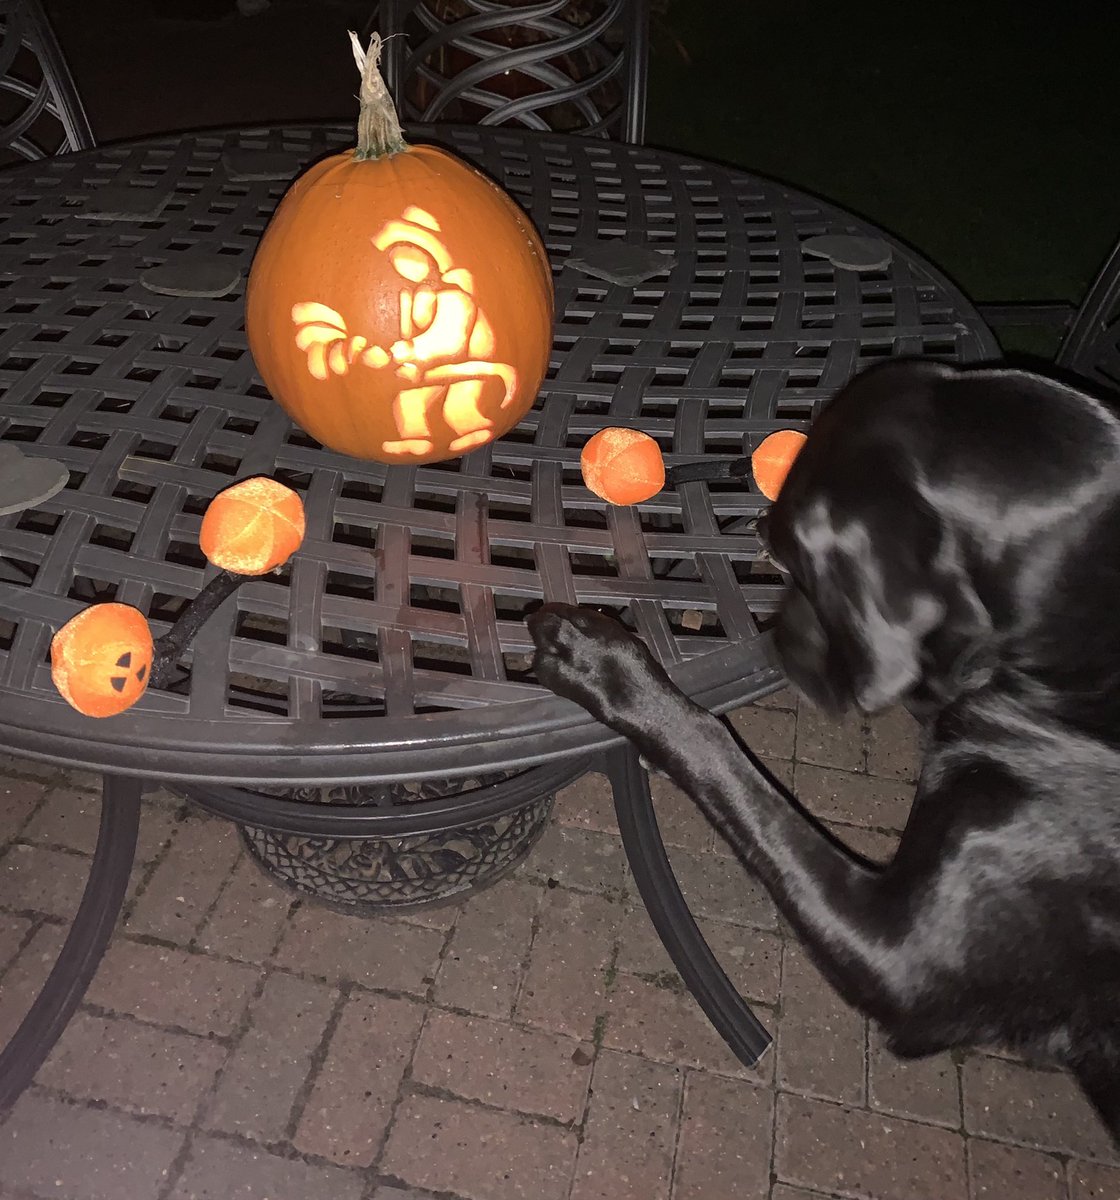 We’re ready for #Halloween 🎃👻🧙‍♀️🕷Do you like our special #pumpkin? 🤗

Please remember to use battery powered candles to light your pumpkins instead of tea lights. If this isn’t possible, keep children & pets safe around candles. 
#halloween2021 #HalloweenSafety #HalloweenDogs